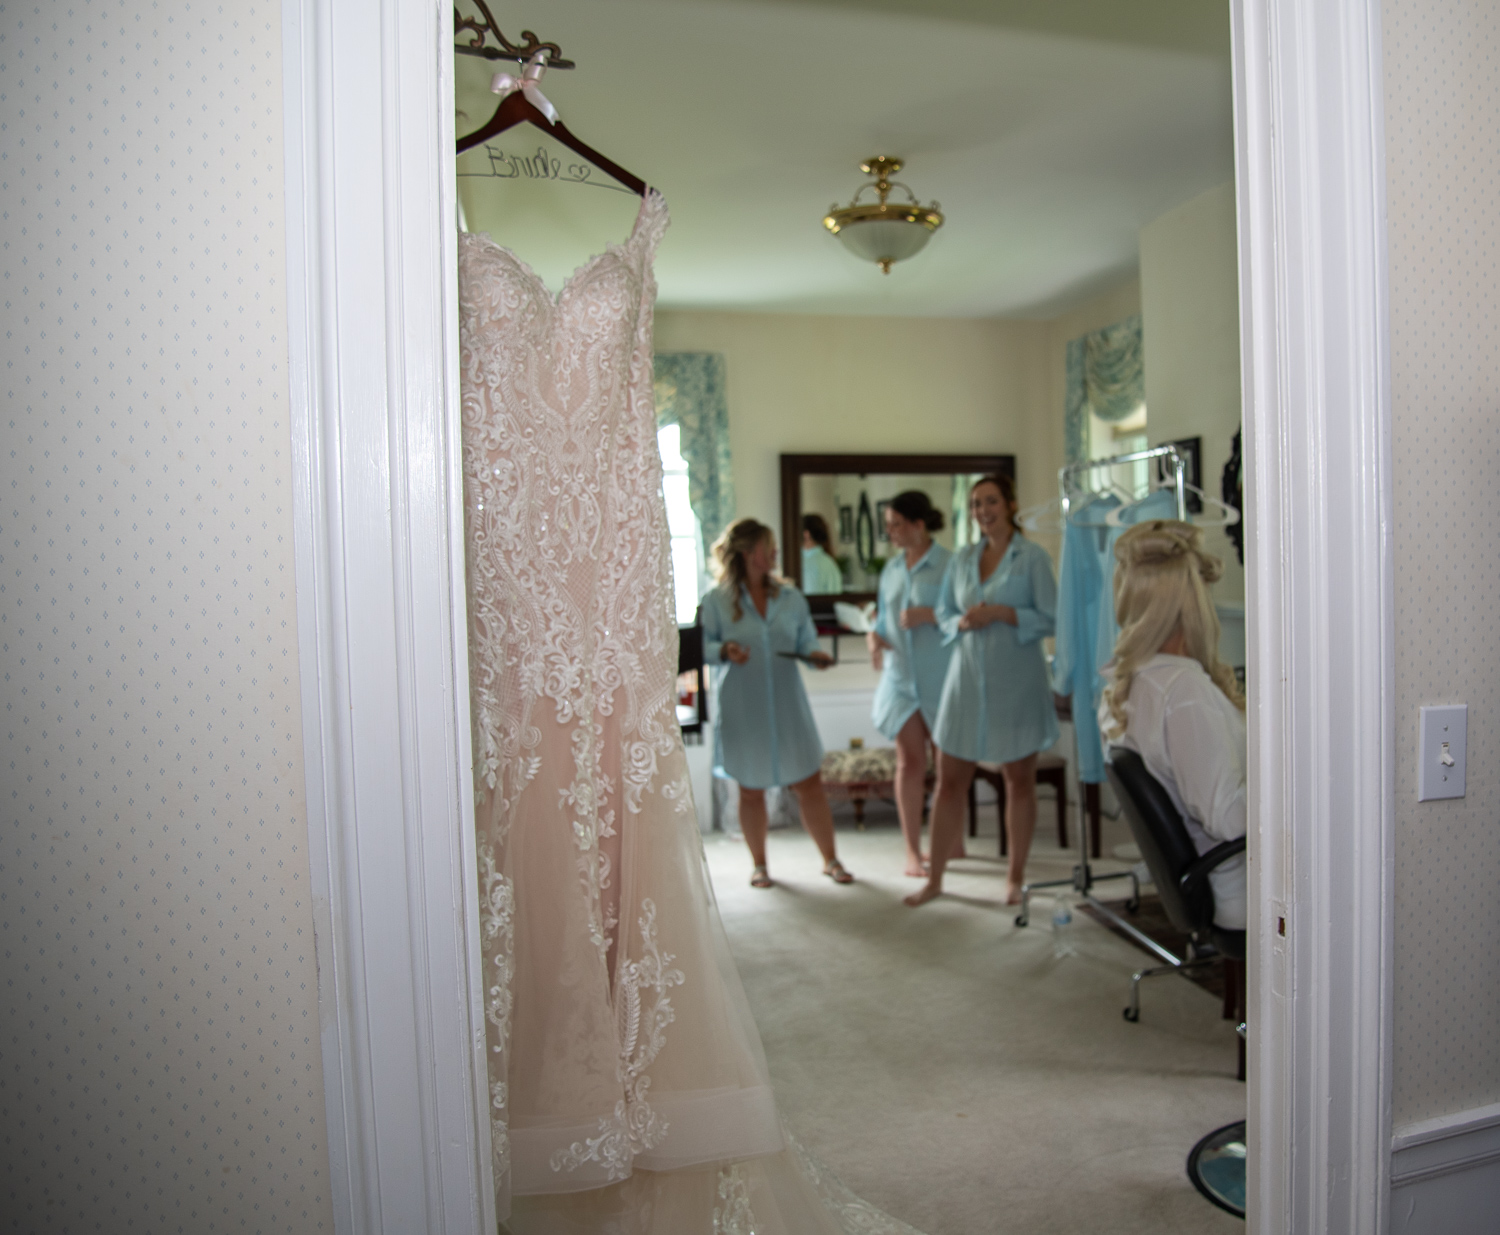 wedding dress in focus with bride and bridesmaids in the background